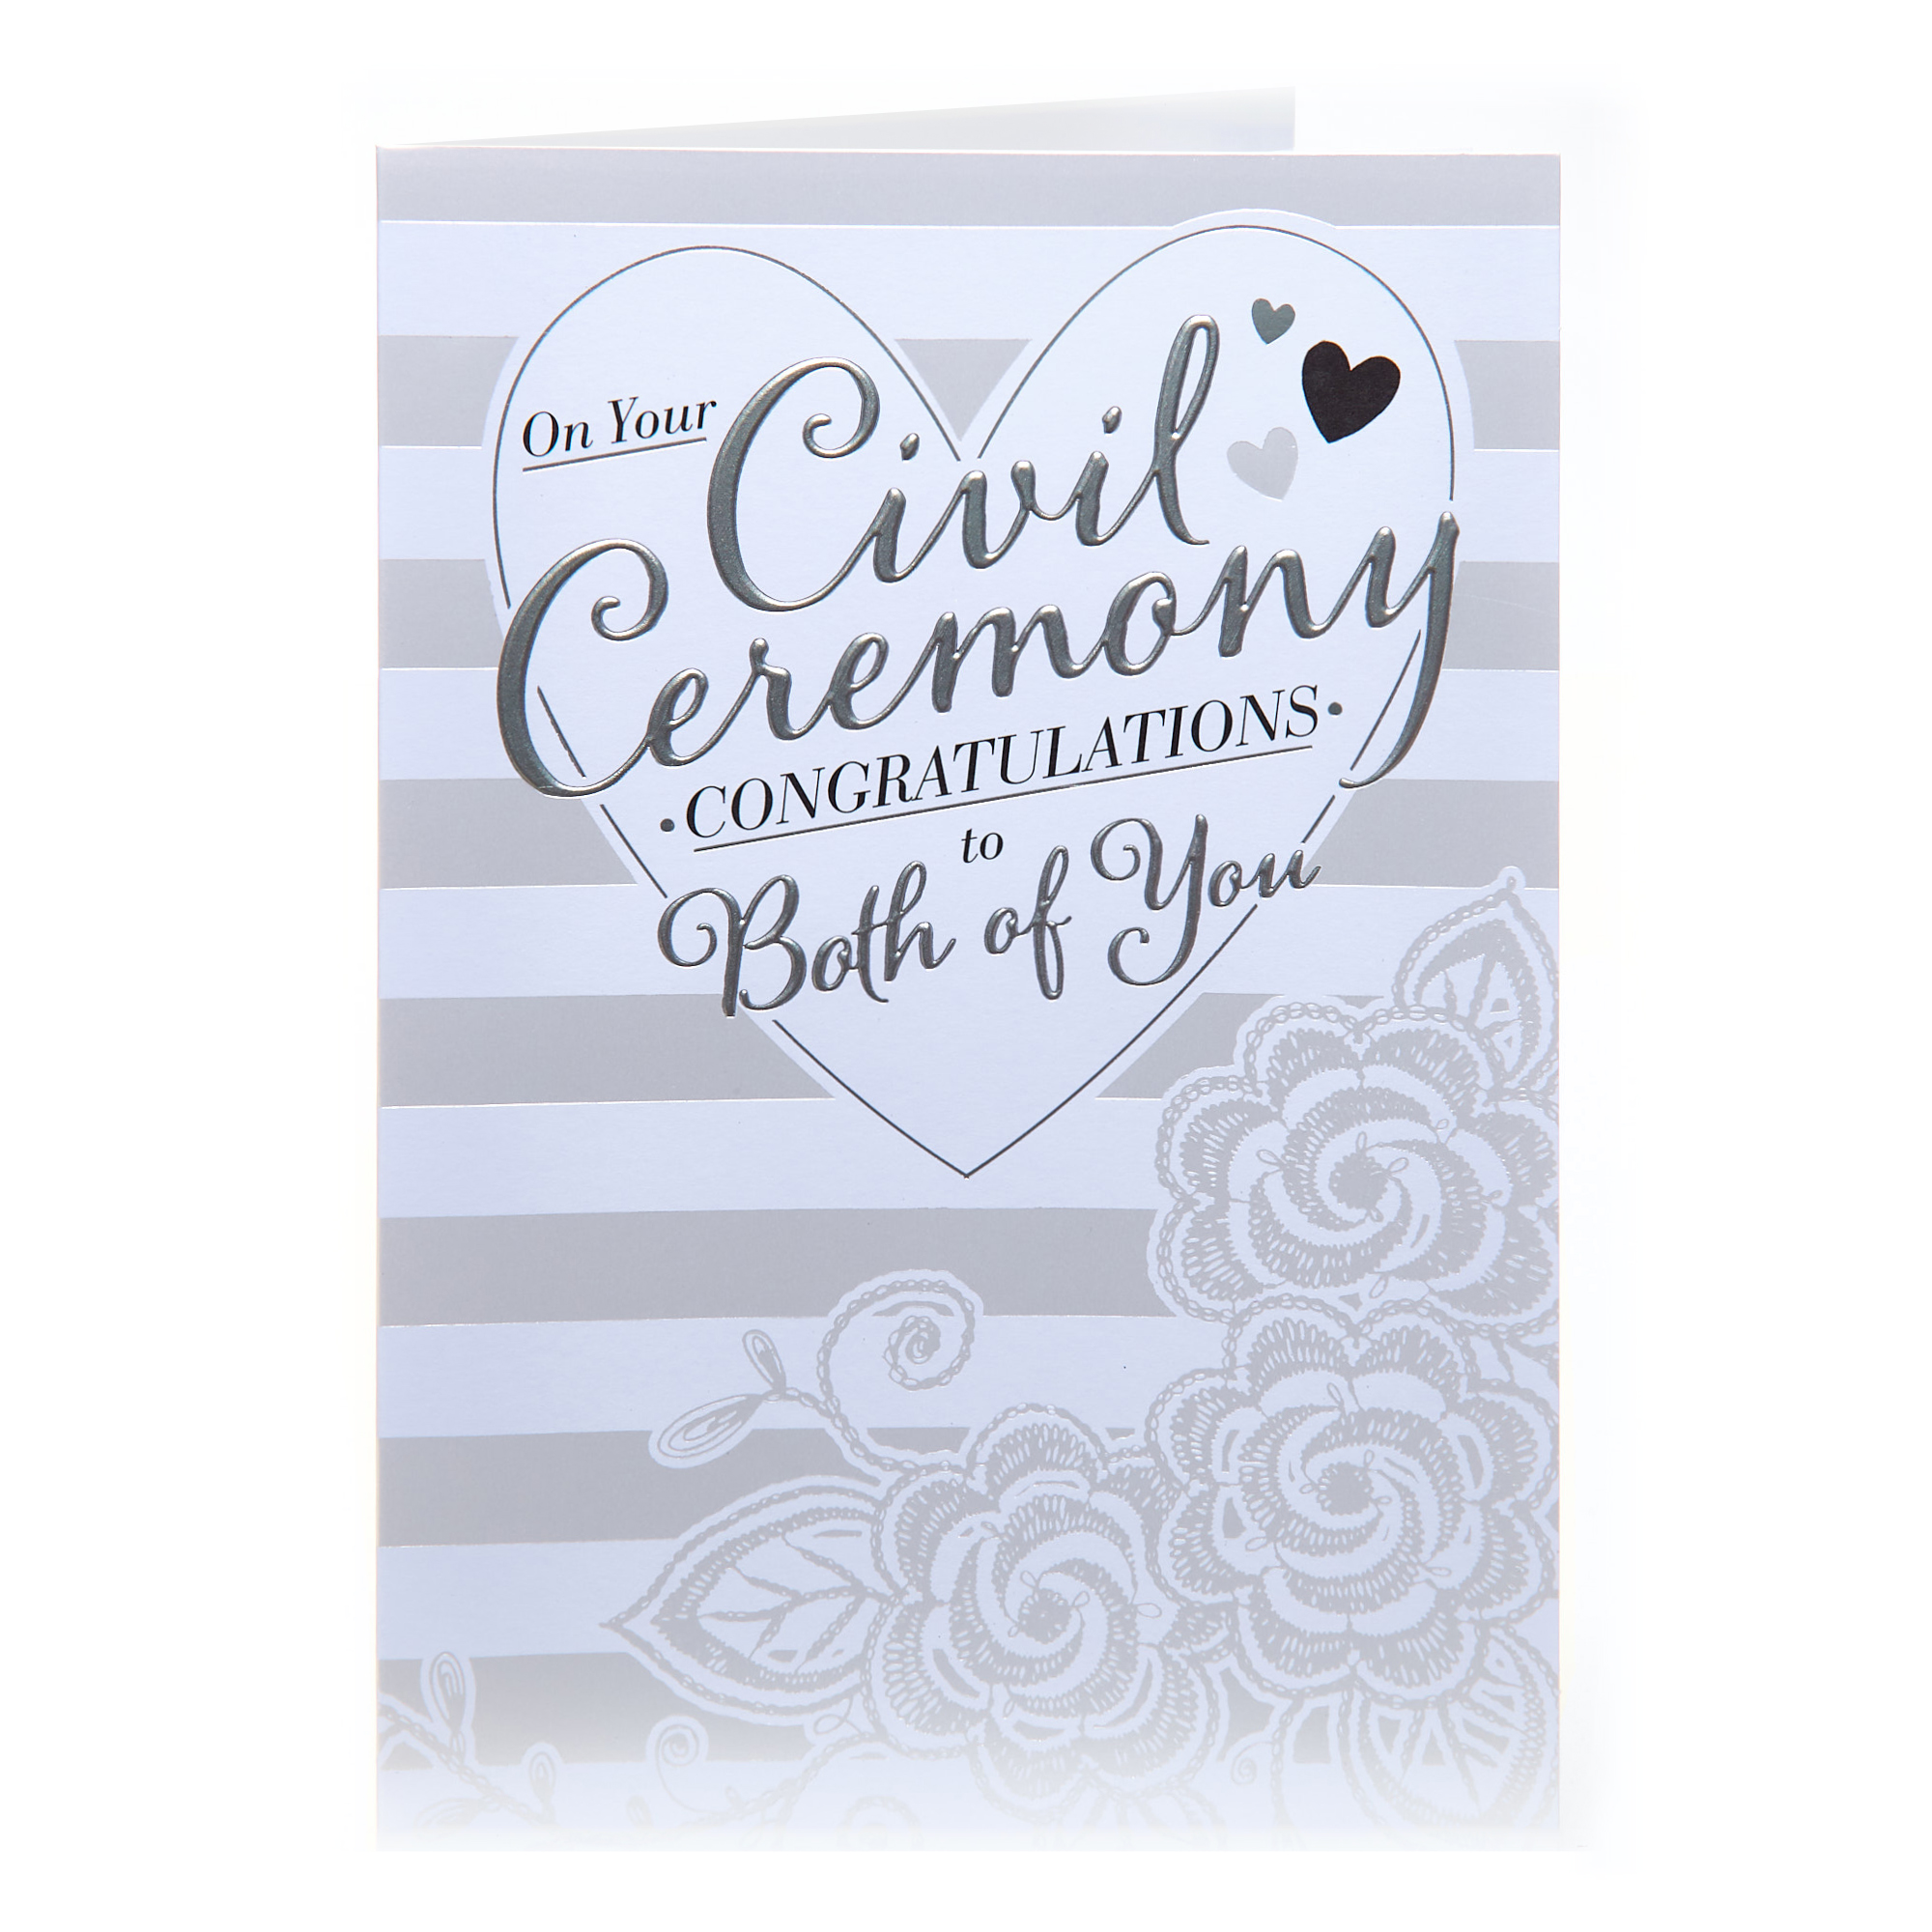 Congratulations Card - On Your Civil Ceremony